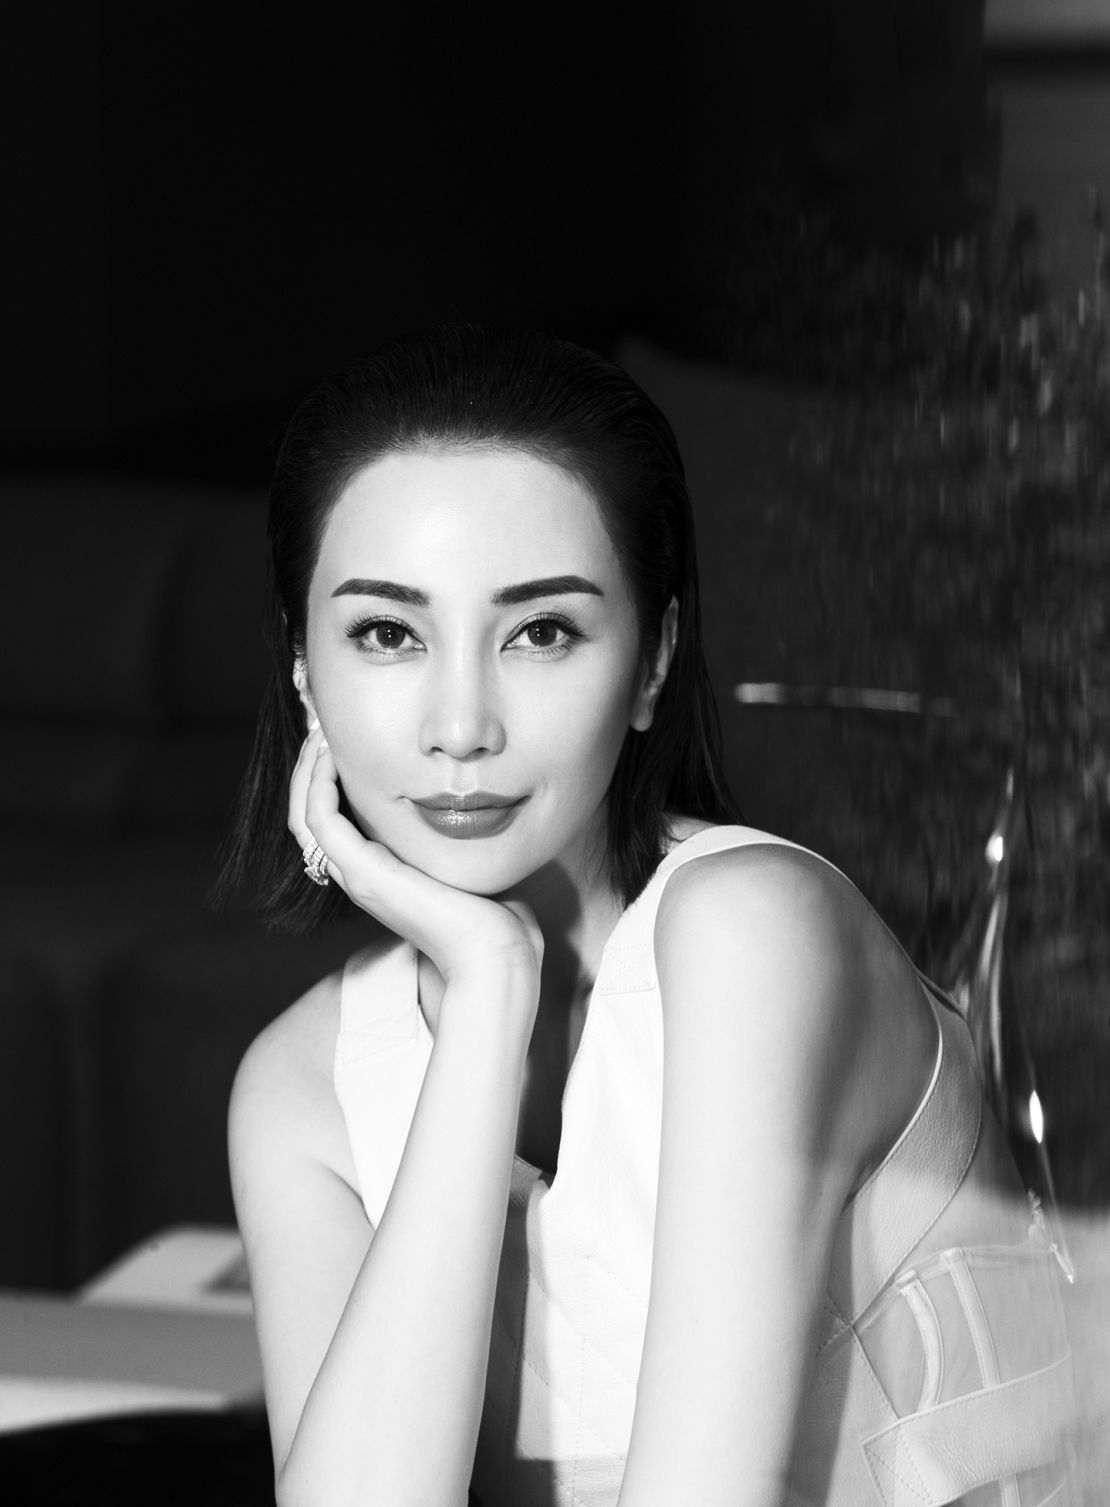 Kylie Ying co-founded the ART021 Shanghai Contemporary Art Fair with her husband in 2013. She is one of China's most prominent young collectors.